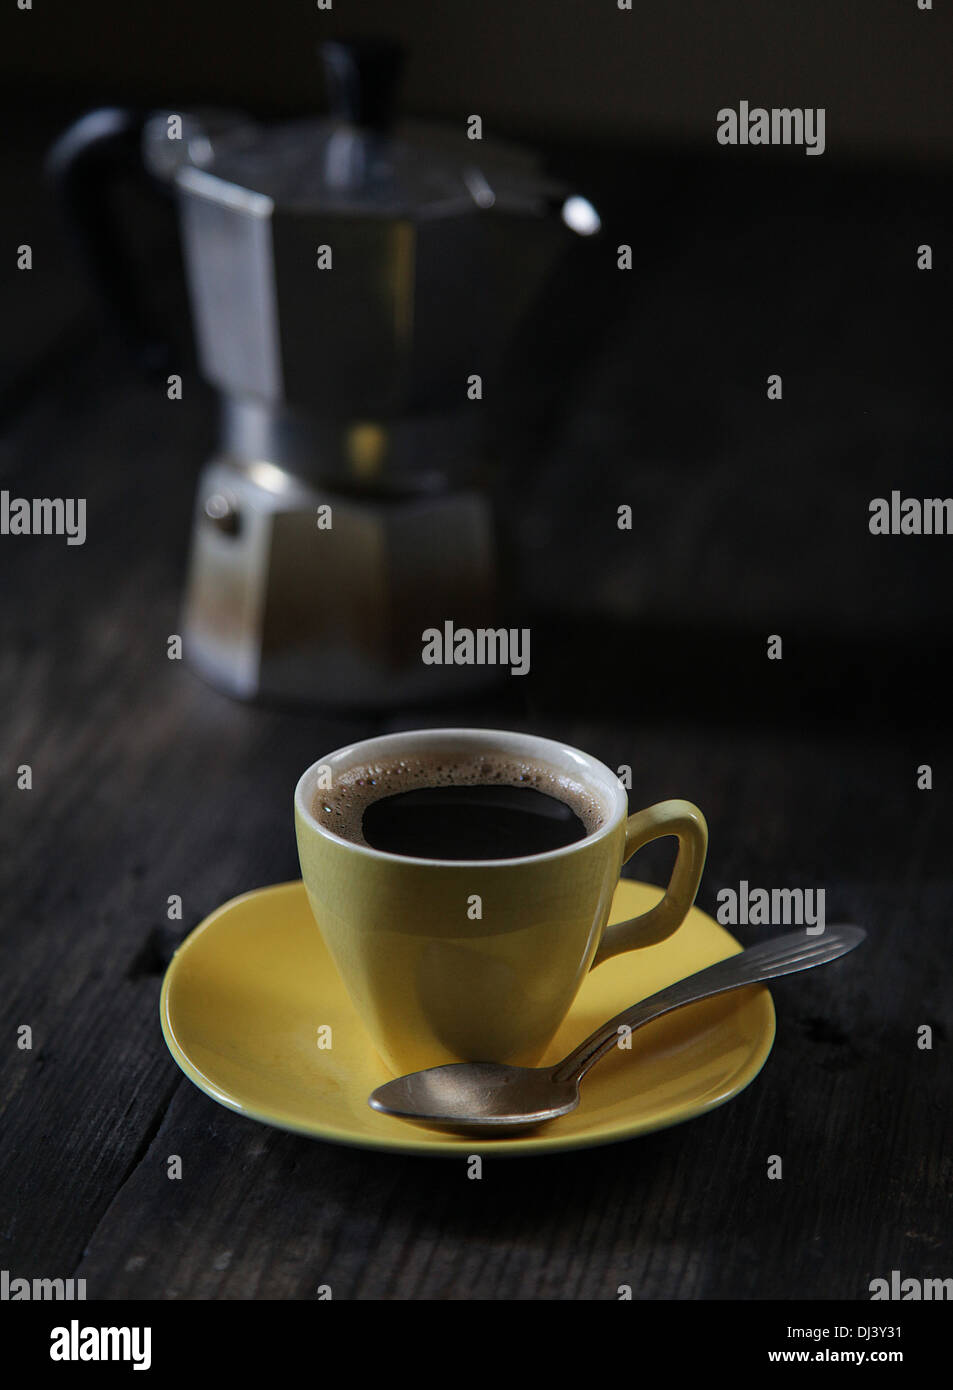 Coffee cup on table Stock Photo